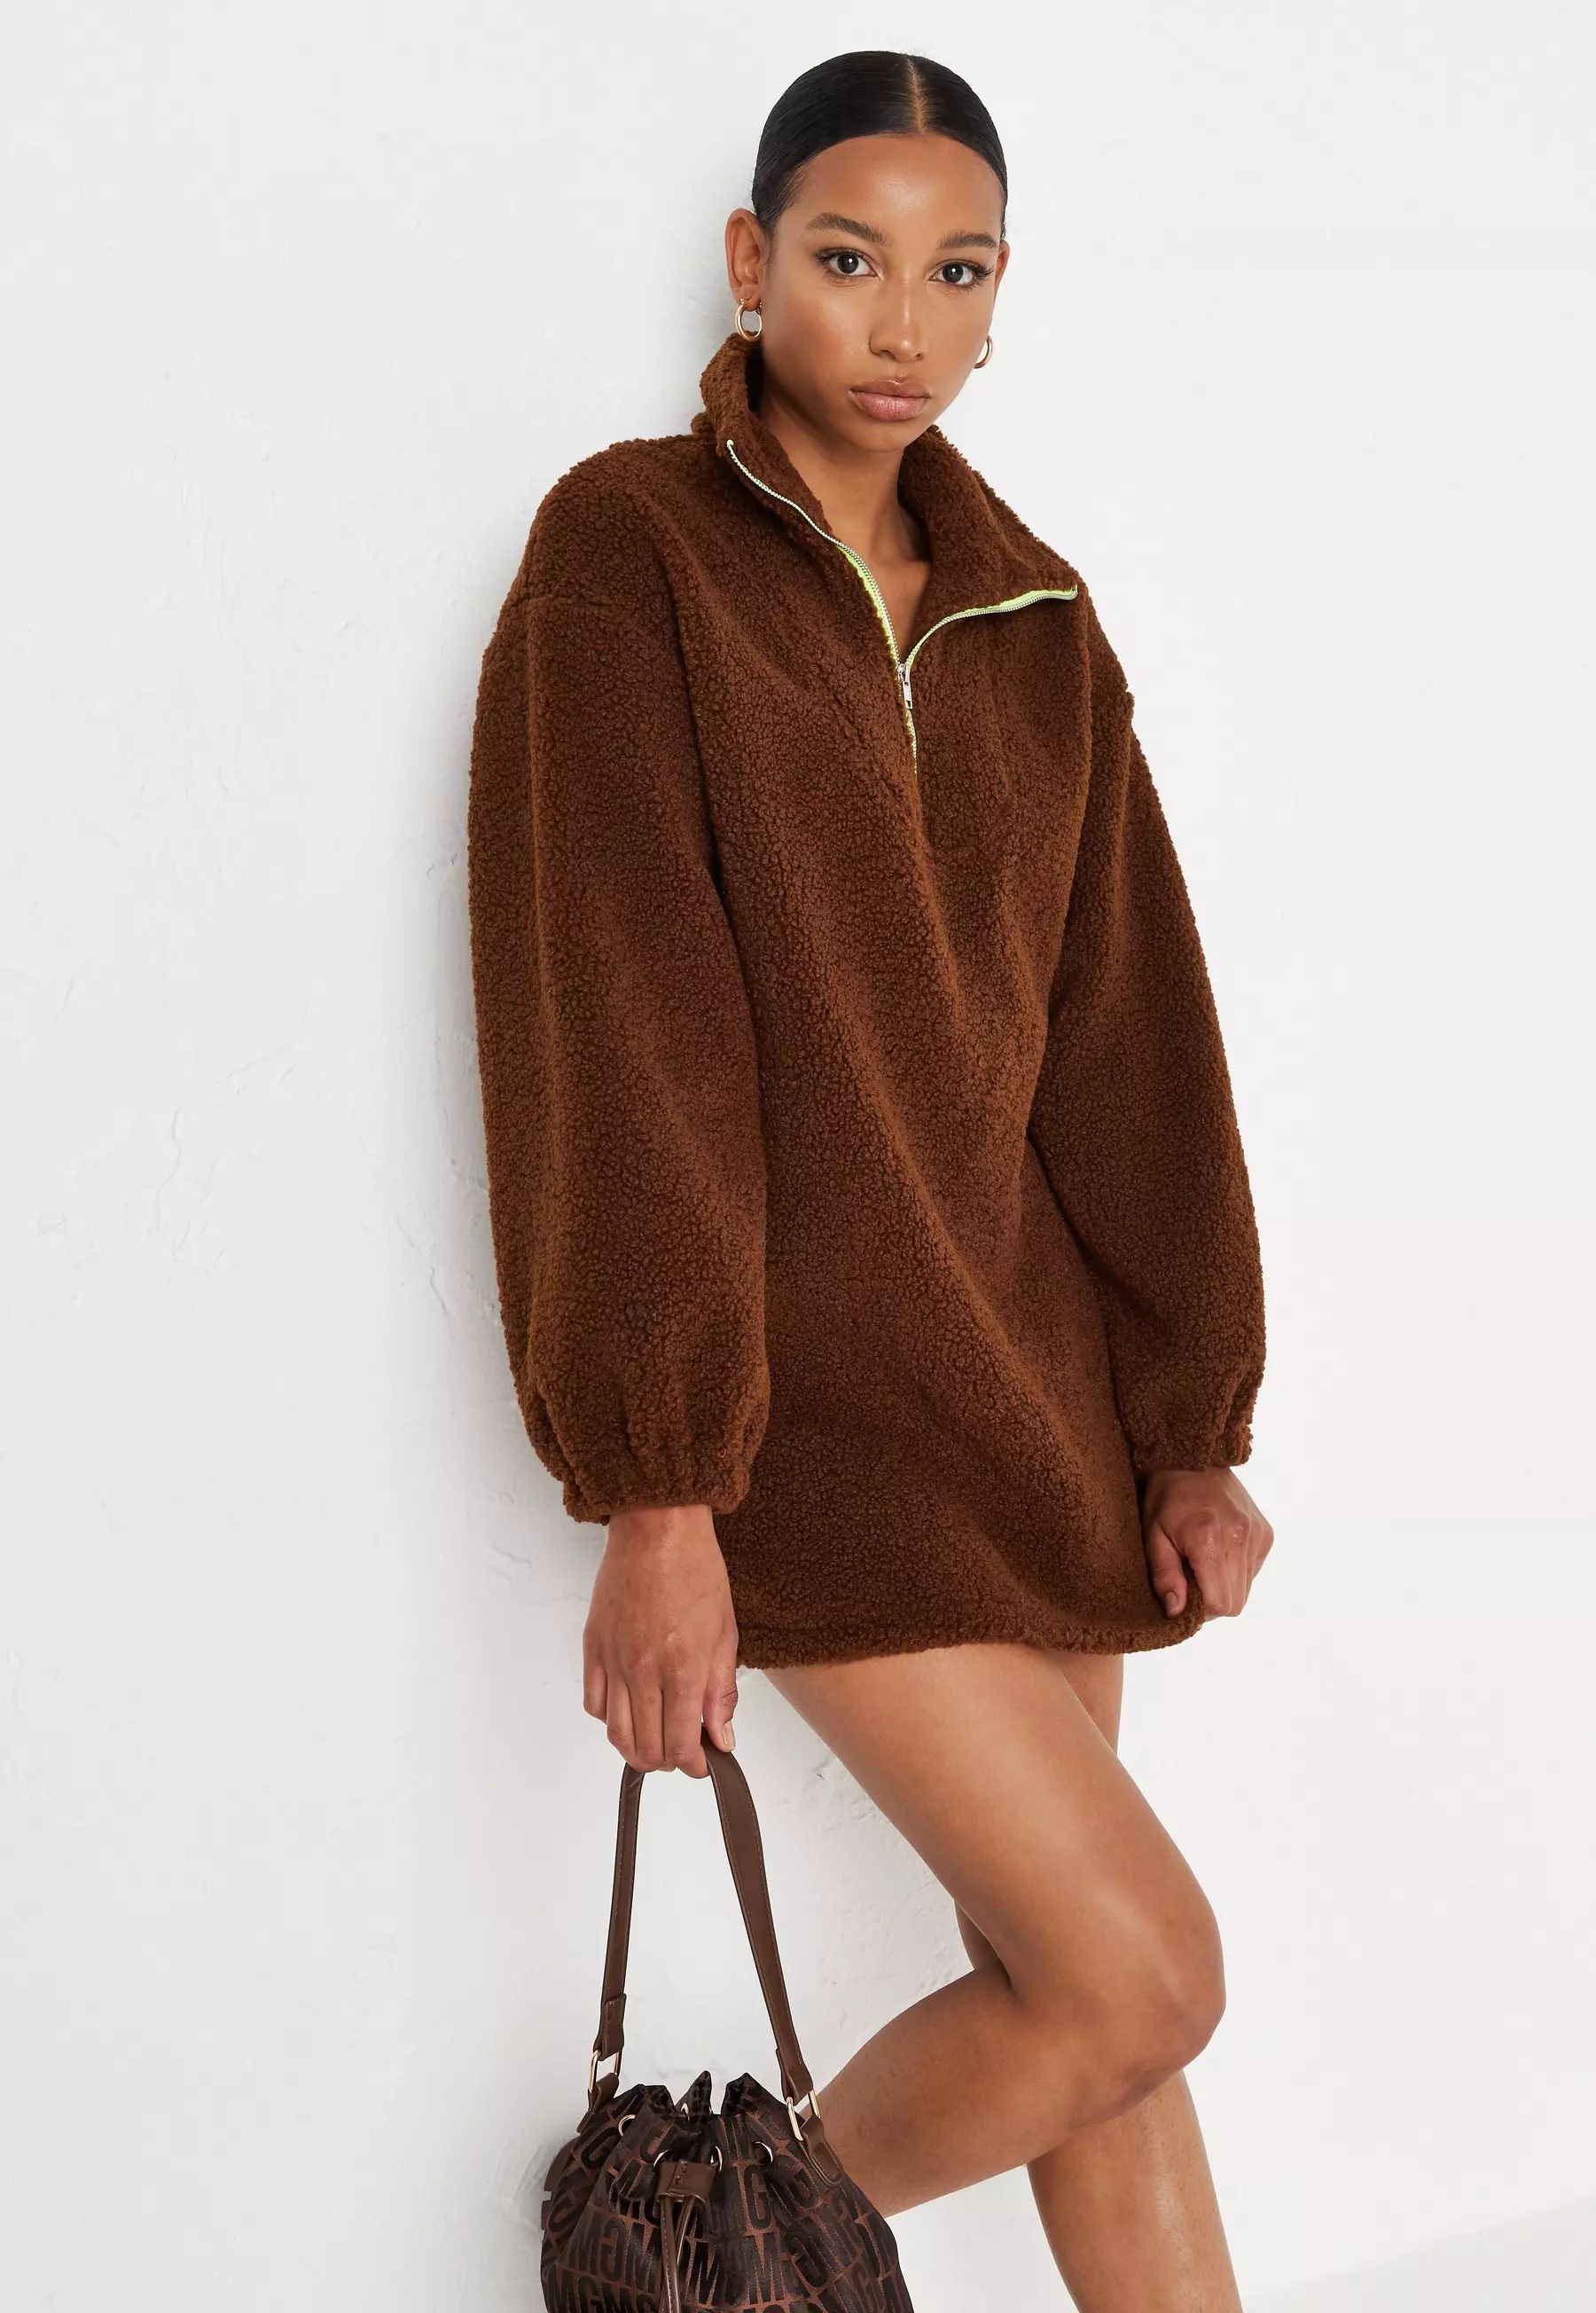 Missguided - Chocolate Borg Contrast Half Zip Sweater Dress | Missguided (US & CA)